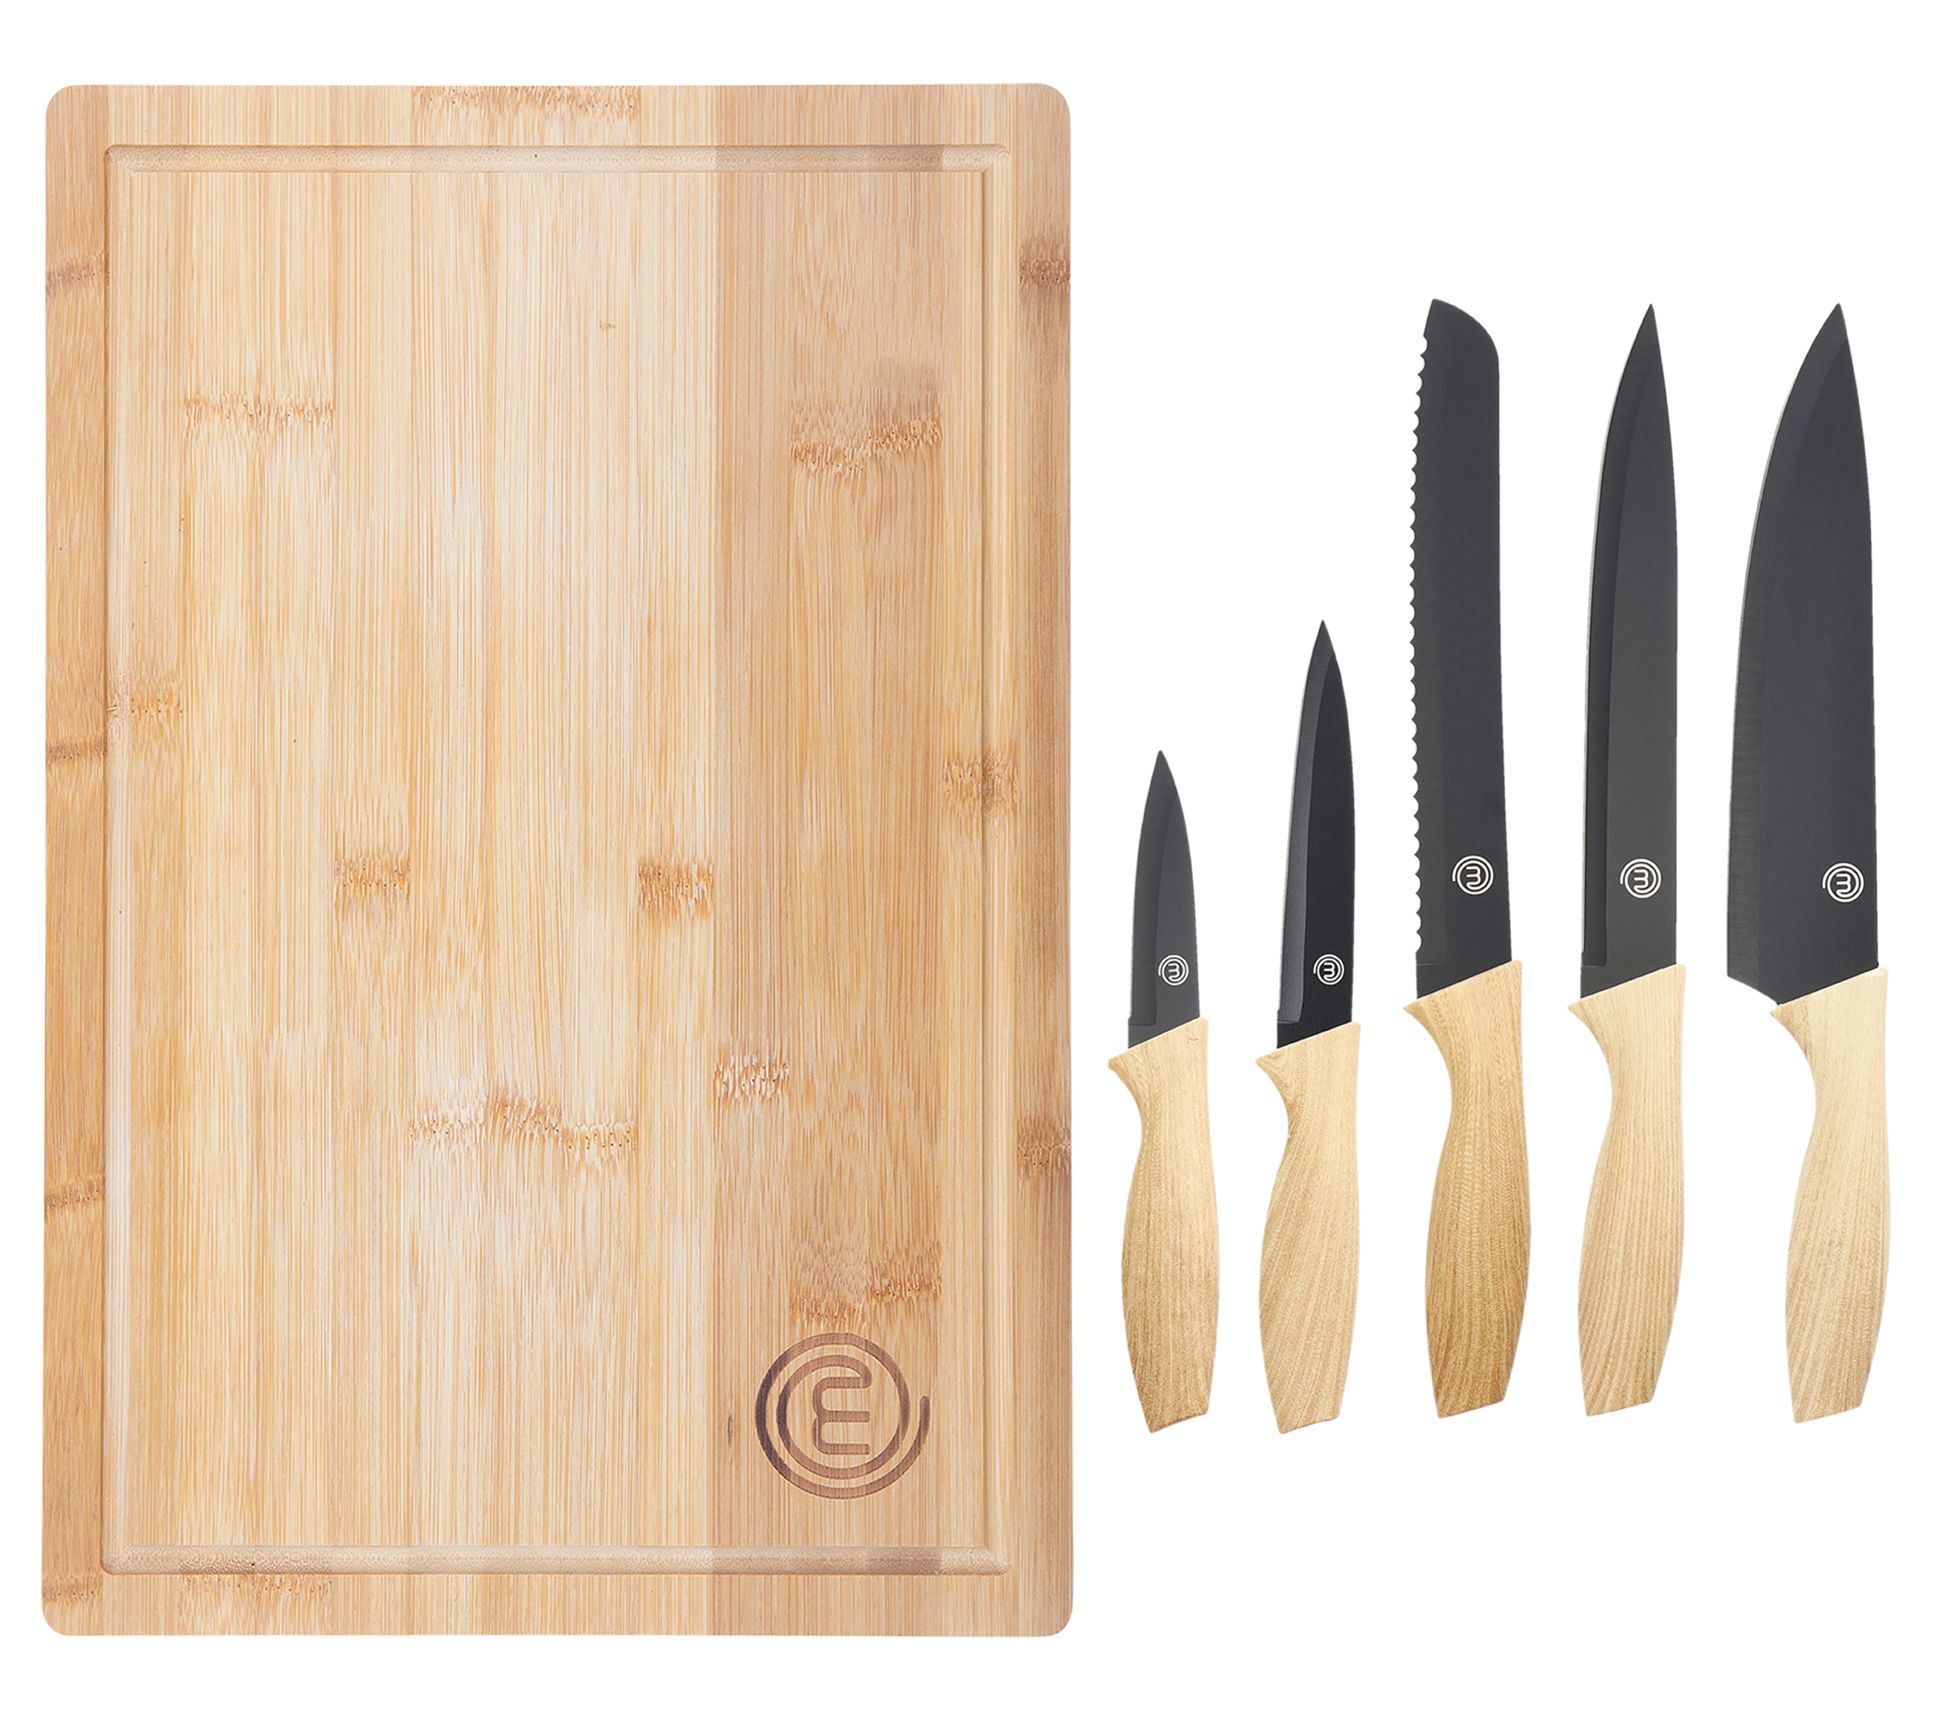 The MasterChef Knife Set 5 Piece from our Black Essential Collection